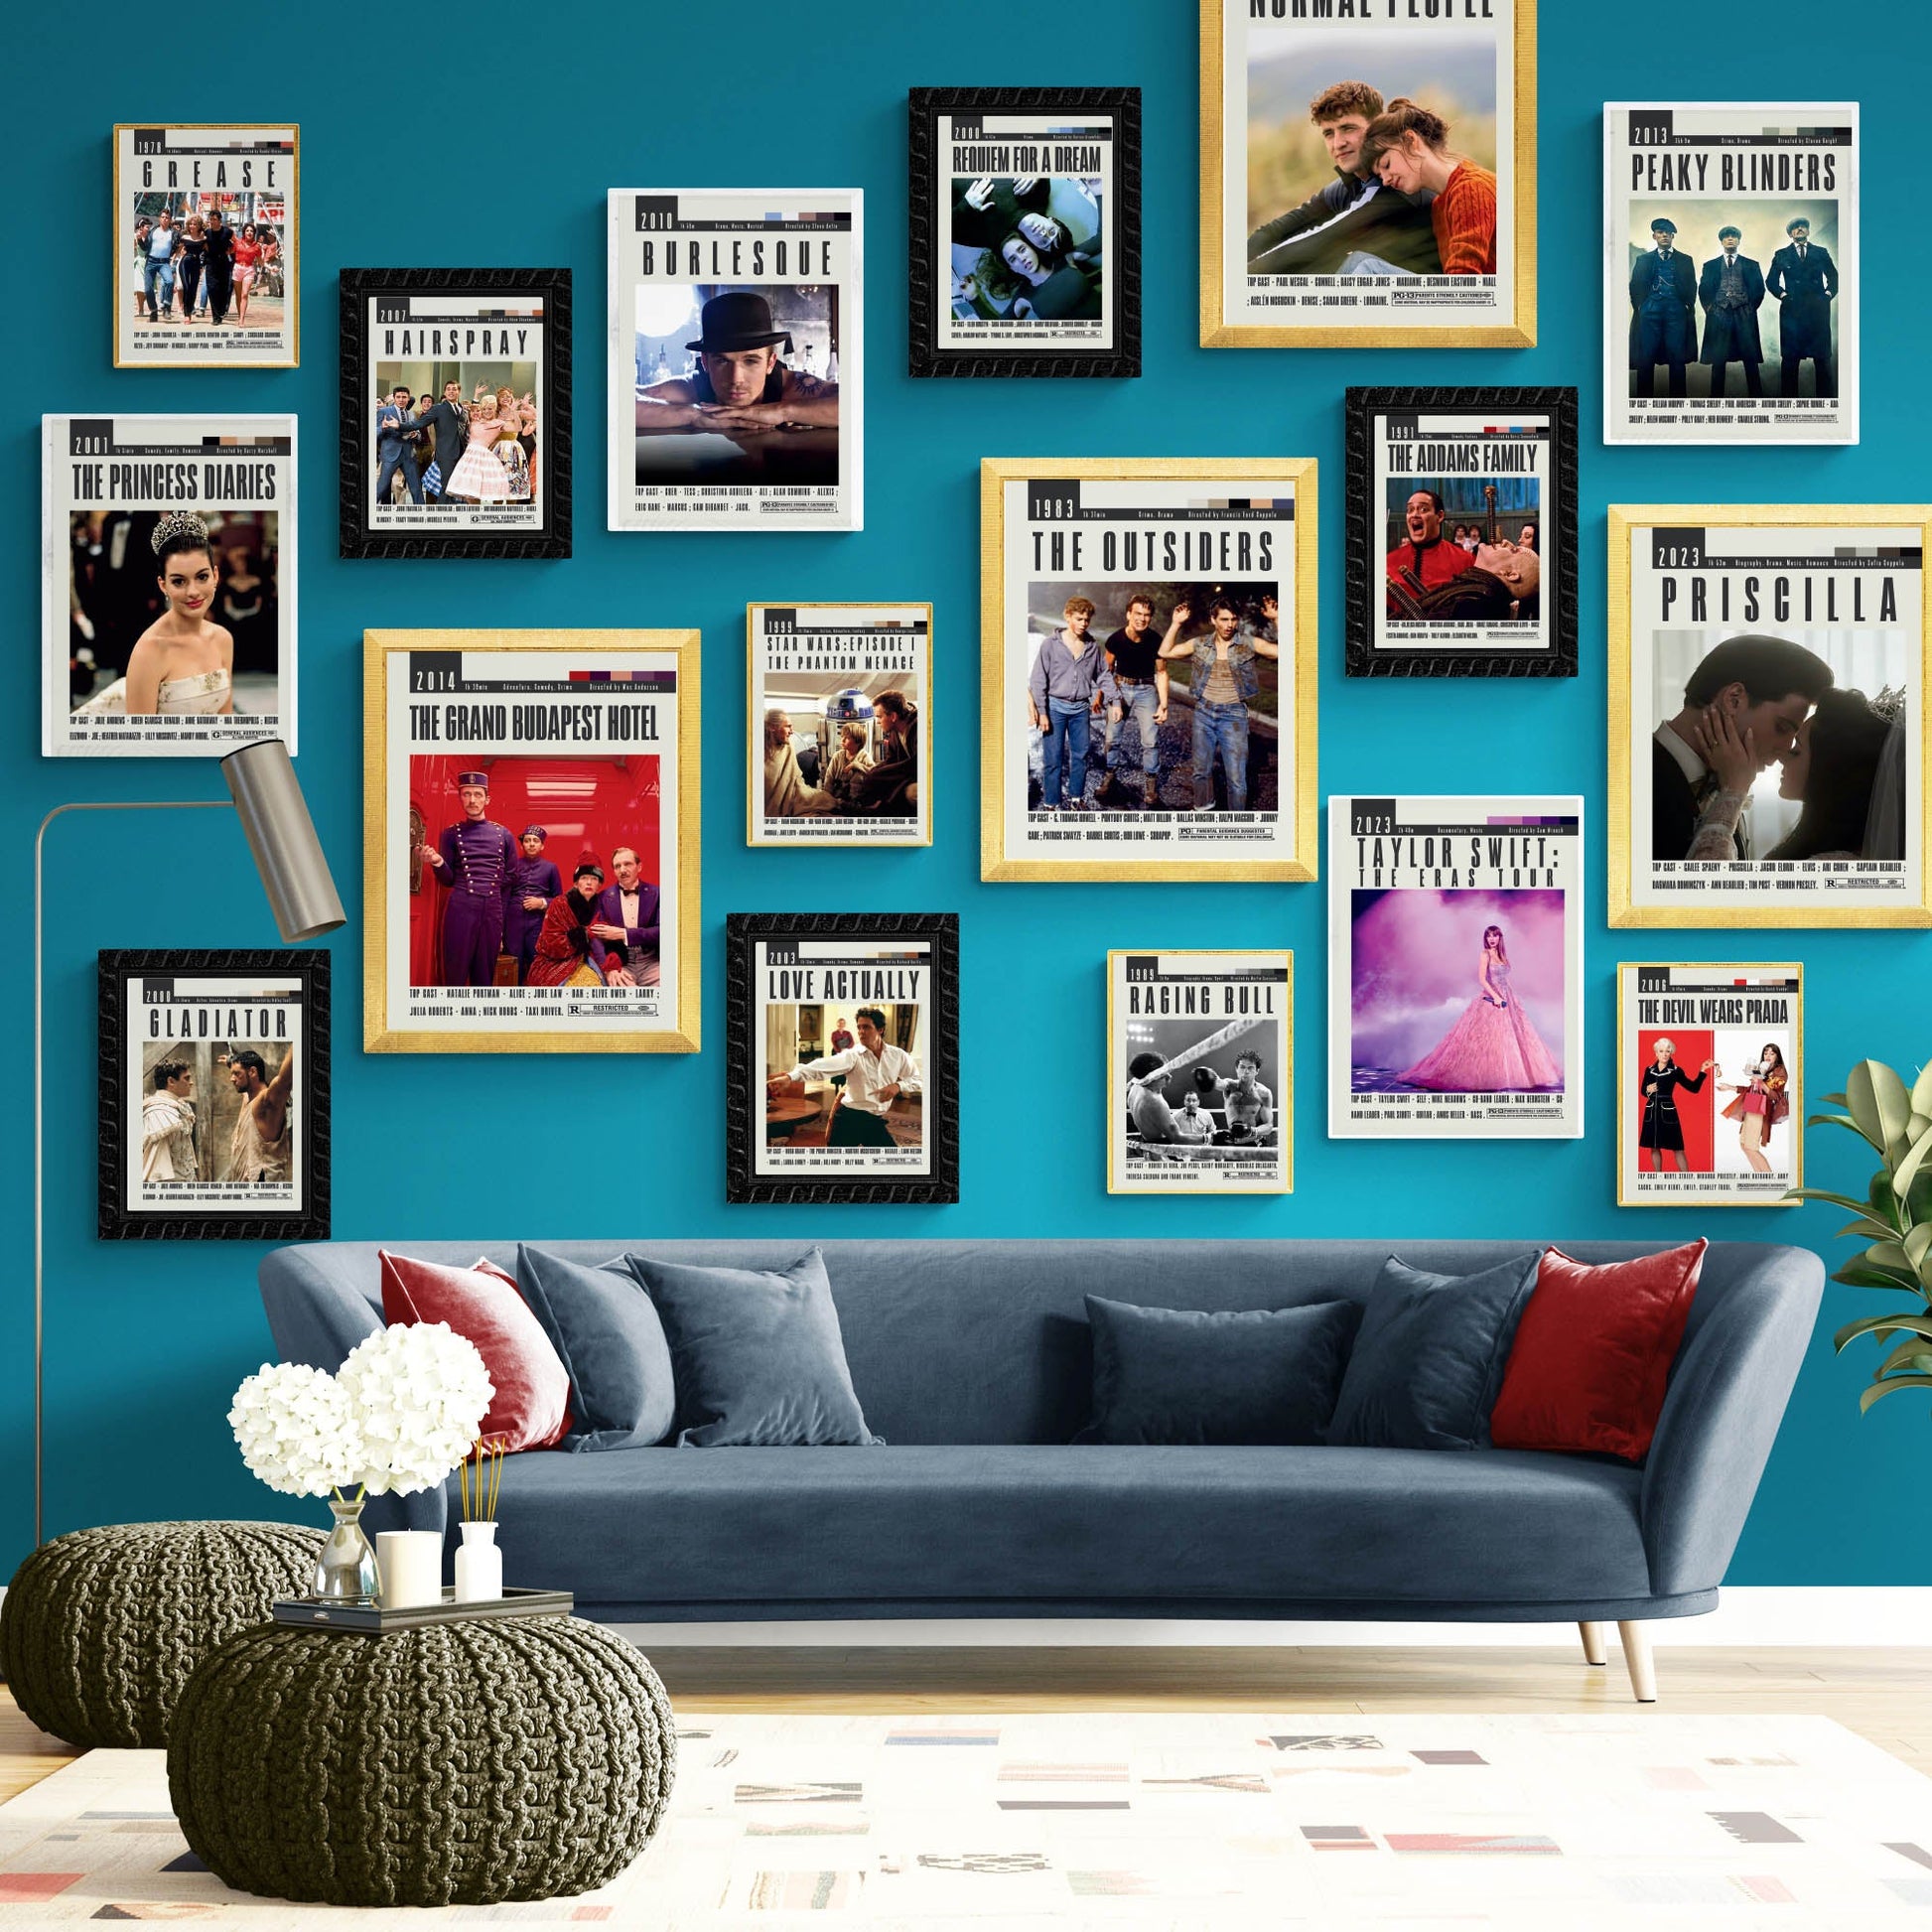 Add a touch of nostalgia to your decor with our Princess Diaries movie posters, featuring iconic mid-century designs and memorable film artwork. Perfect for fans of Garry Marshall movies and British film classics, these vintage-style posters are a must-have for any movie buff. Don't miss out on this top-selling collection of rare and original cinema posters.